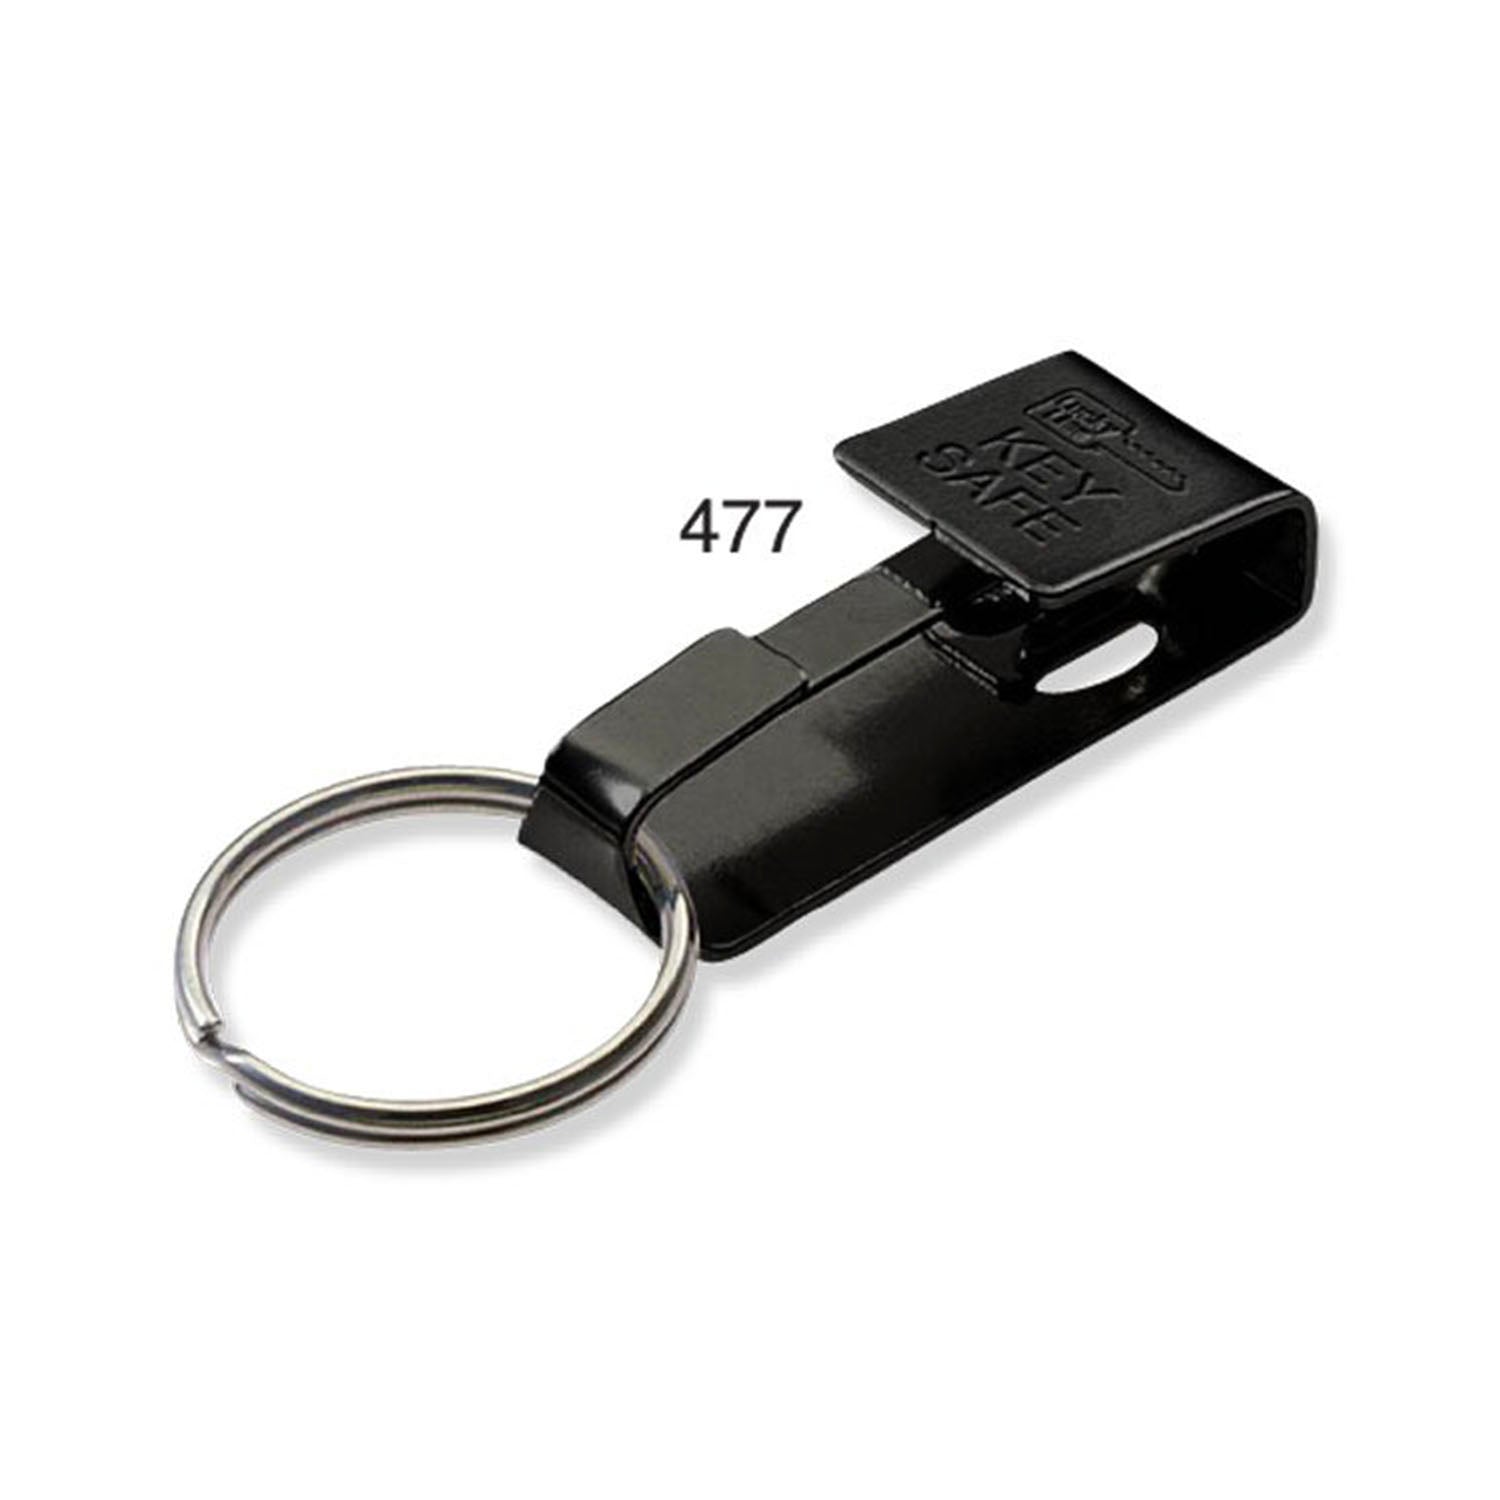 Lucky Line Plastic Key Clip for Backpacks, Belts, Keys, Party Favors, Arts and Crafts, Red, 25 per Bag (41570)